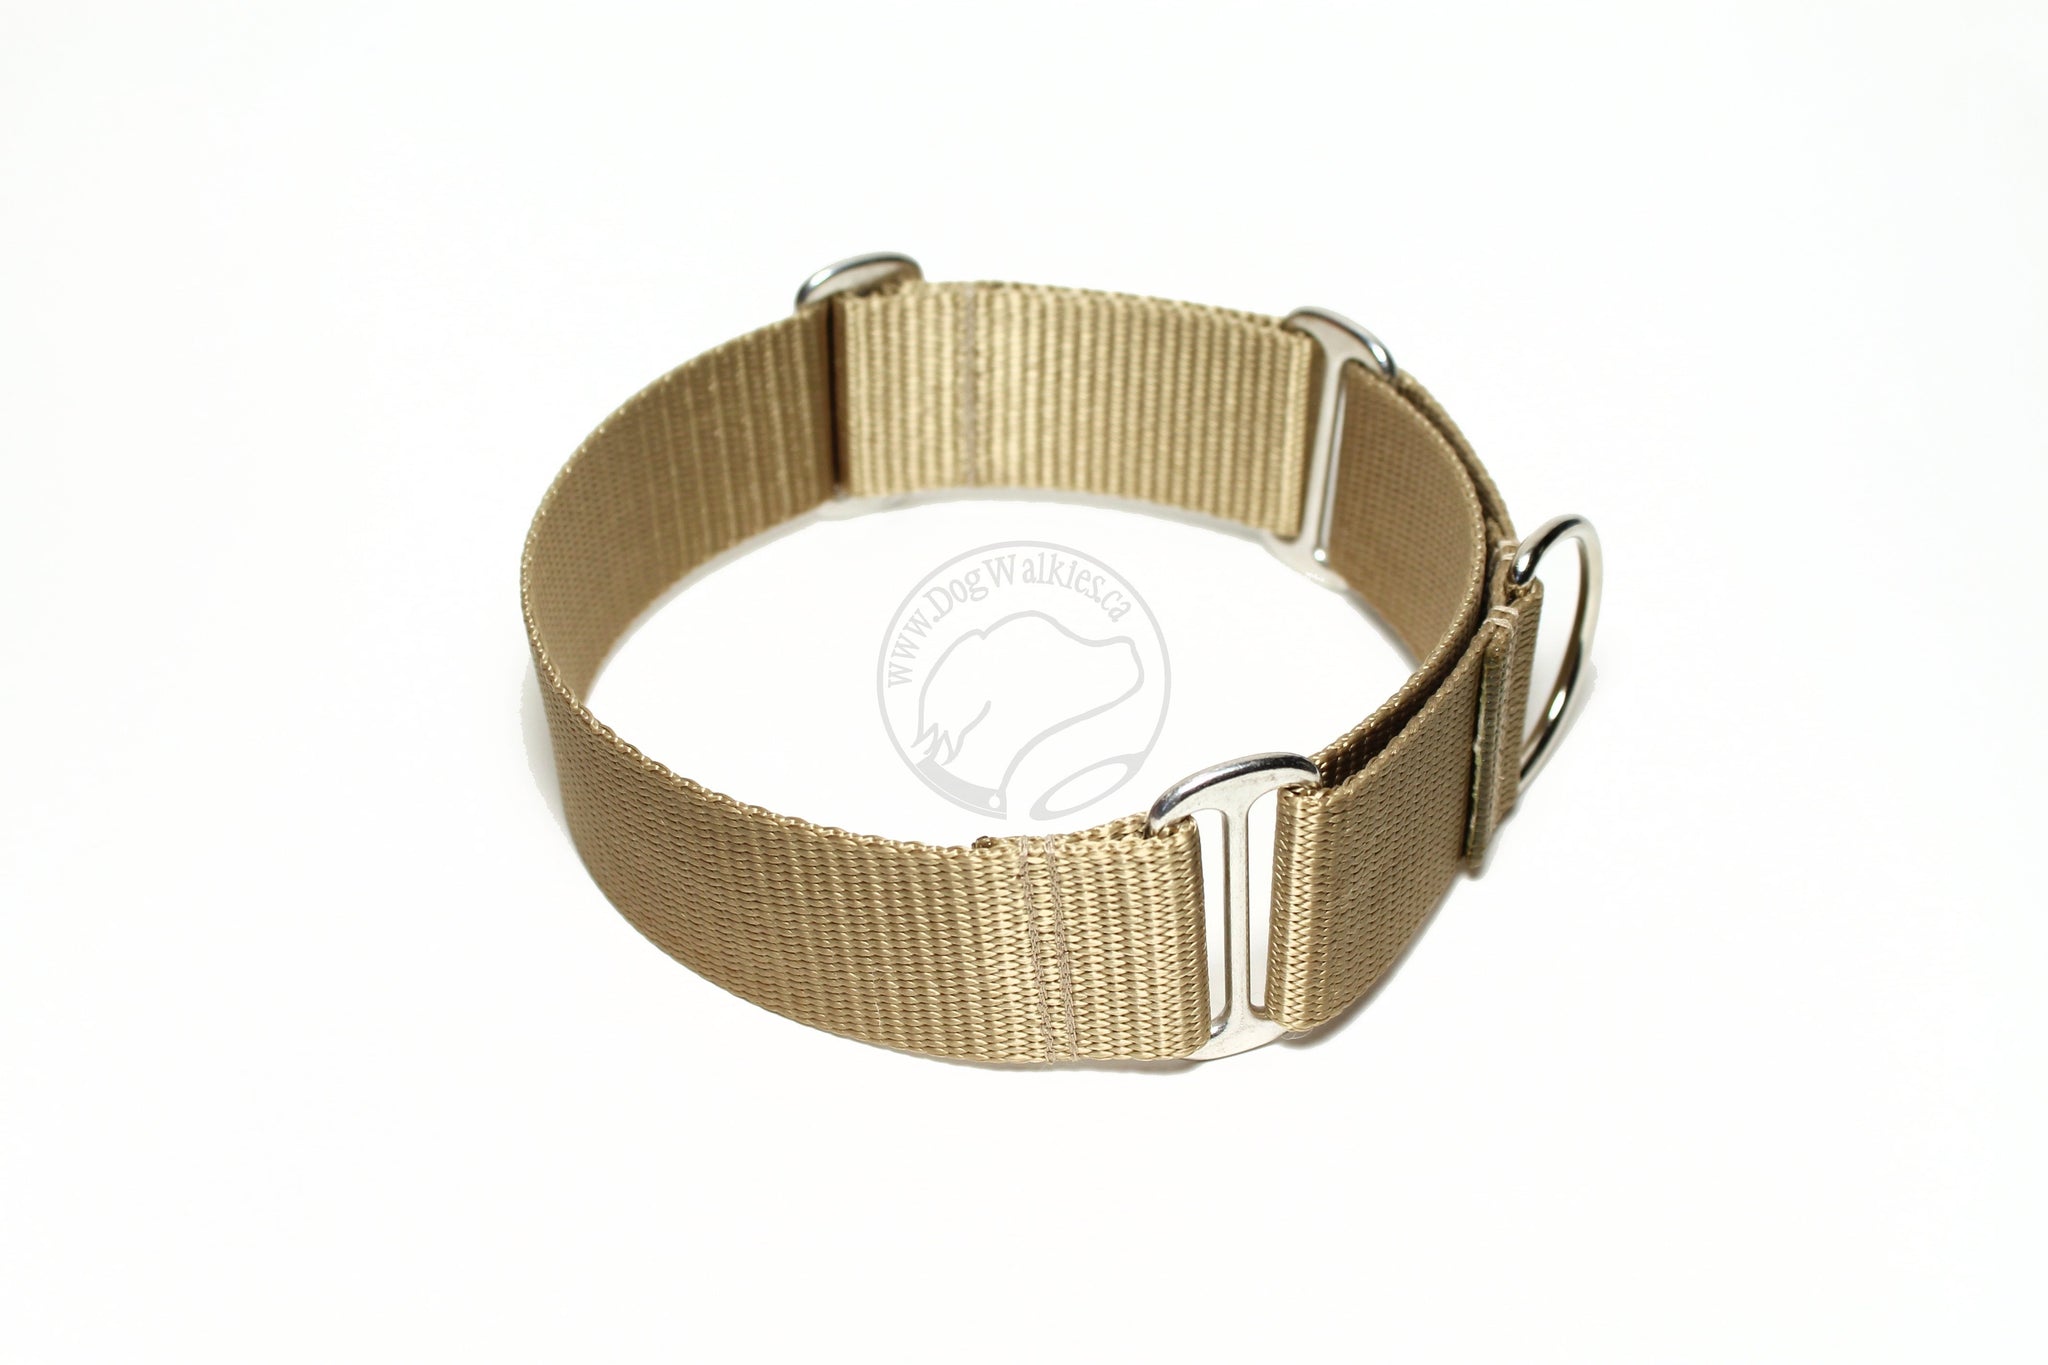 Wide Martingale Dog Collar 1.5" (38mm); Simple - Elegant - Strong